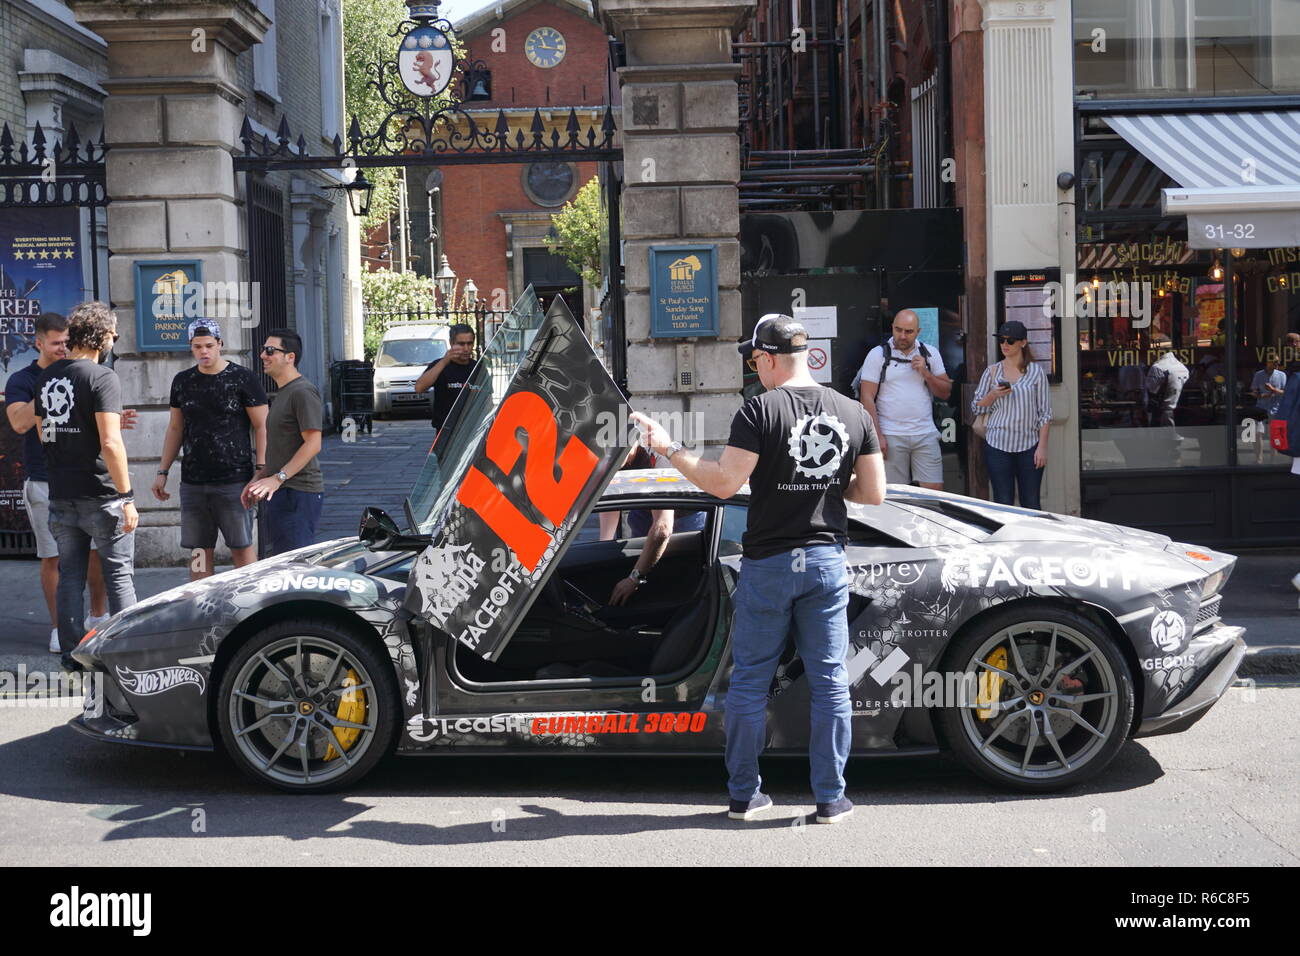 Lamborghini Aventador S arriving in Covent Garden, London for the start of the 2018 Gumball 3000 rally from London to Tokyo. Stock Photo